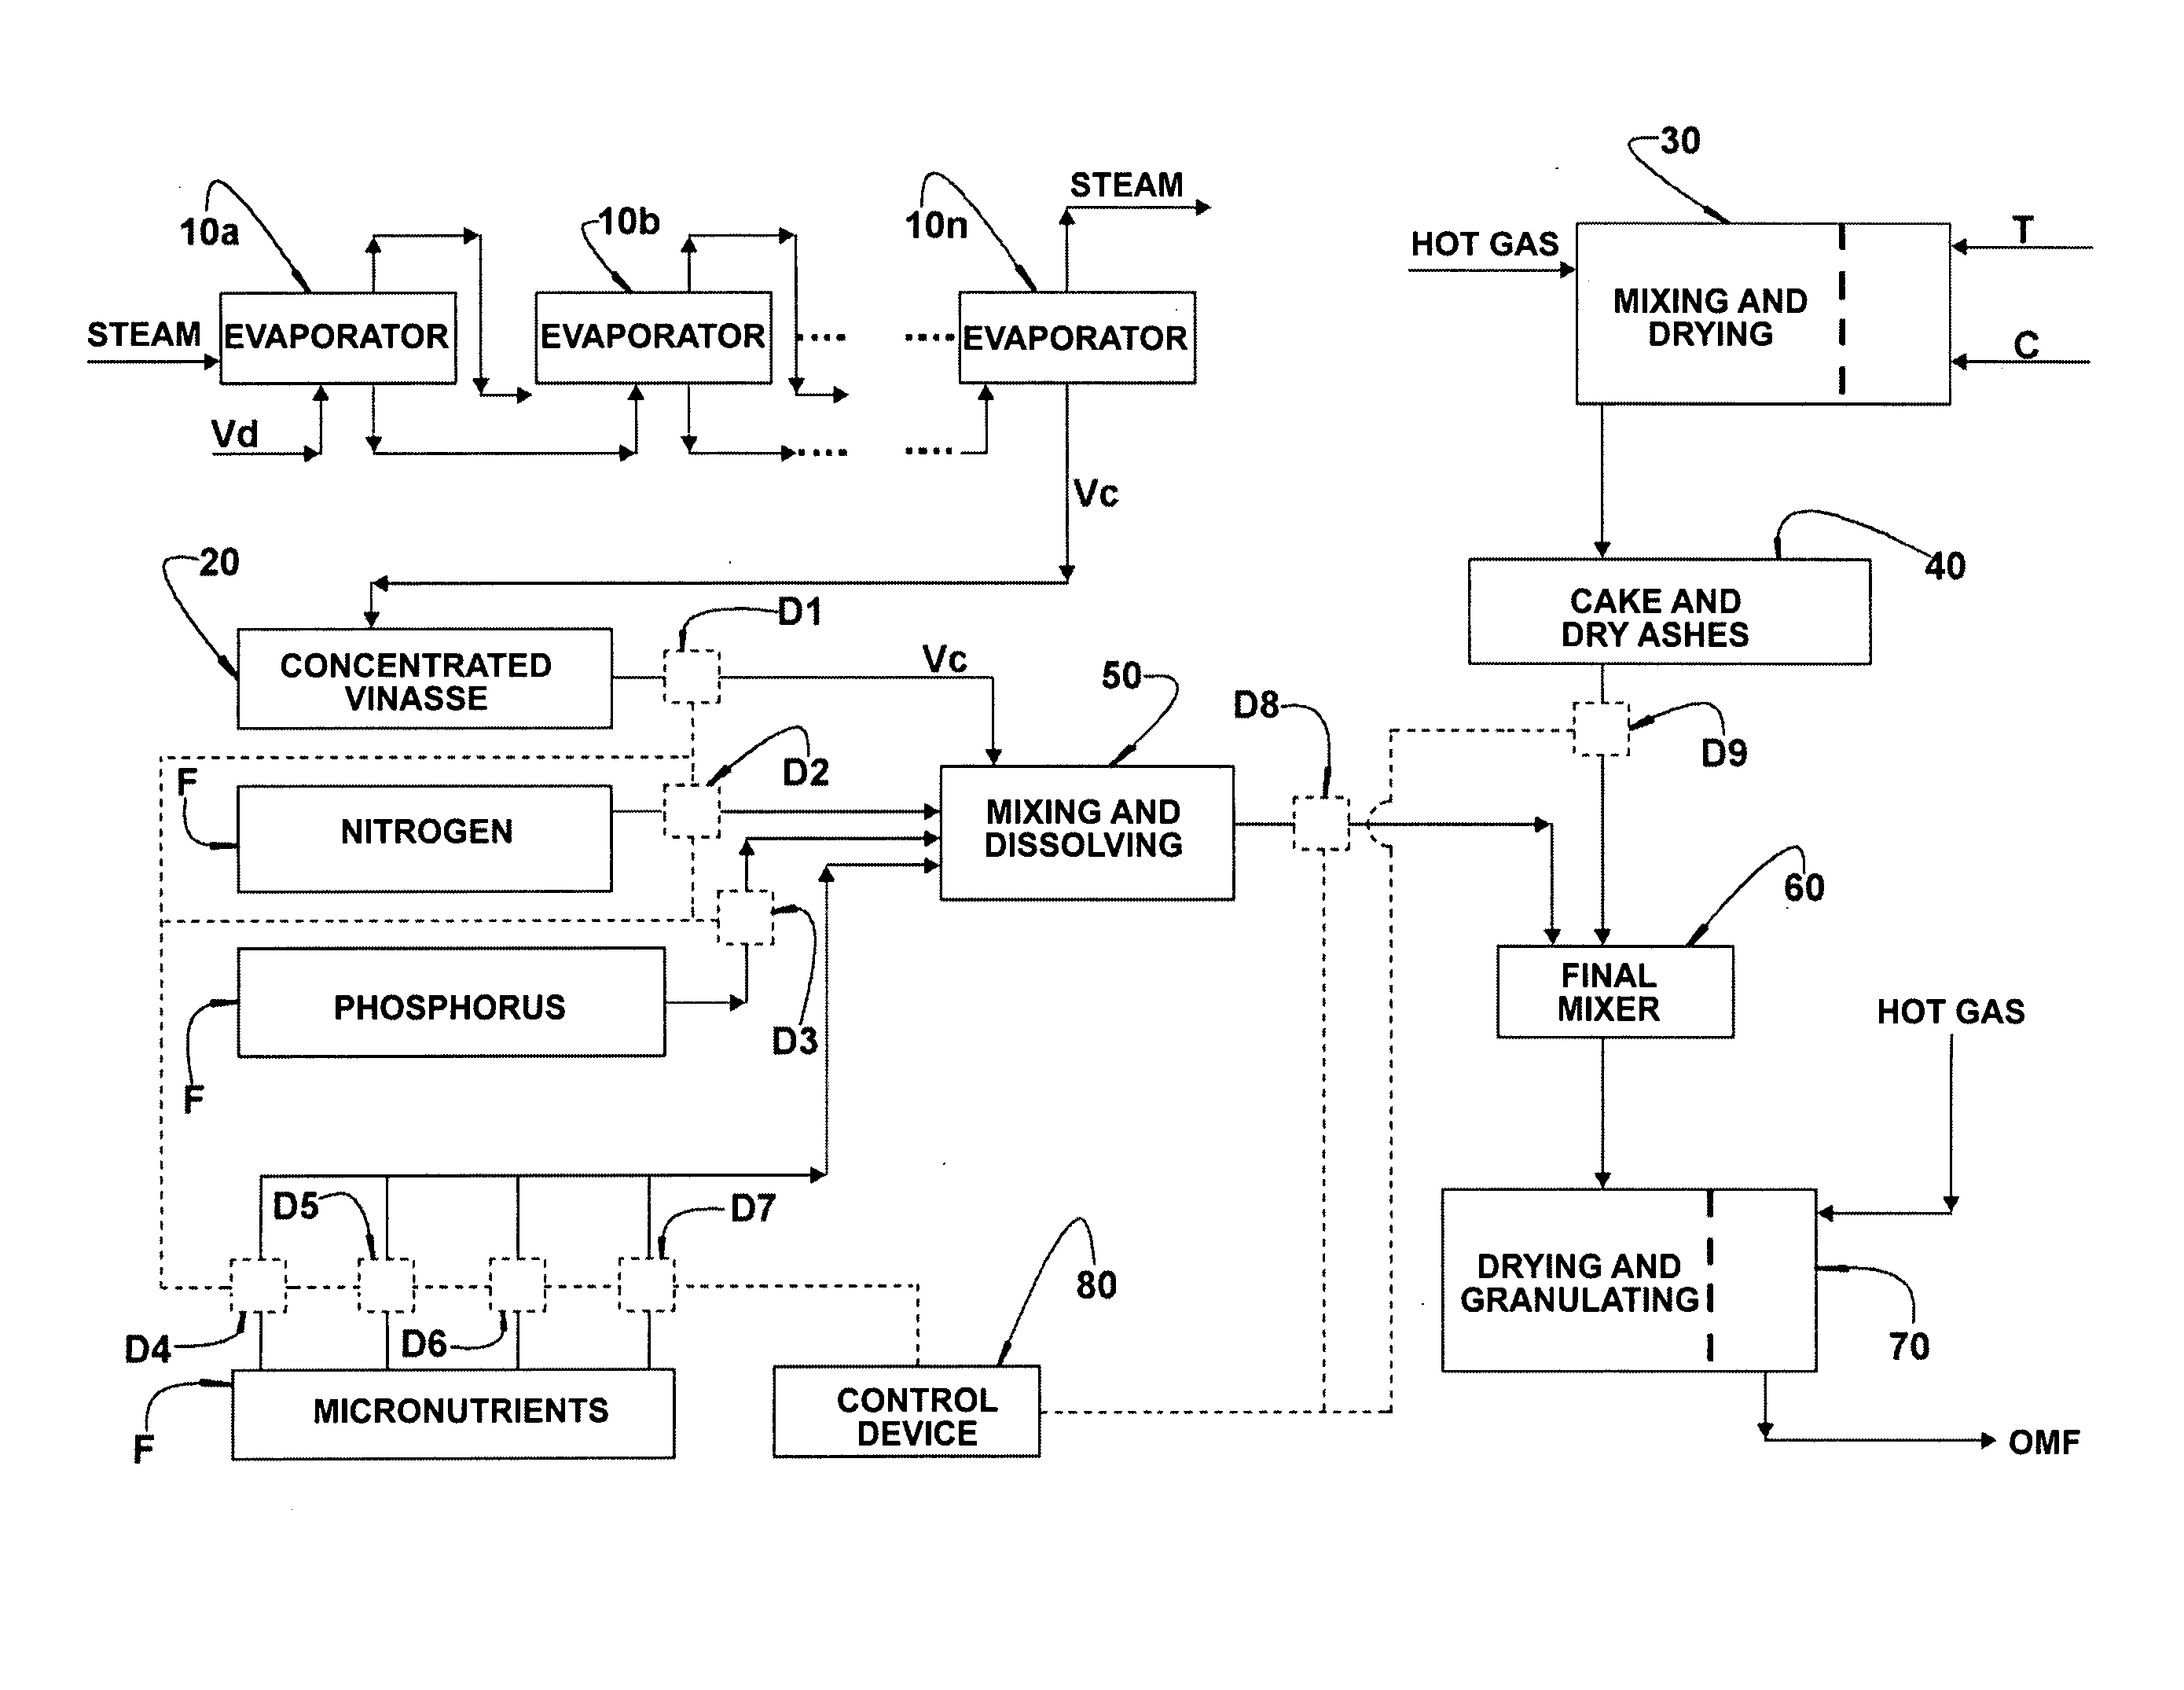 Process for producing an organo-mineral fertilizer